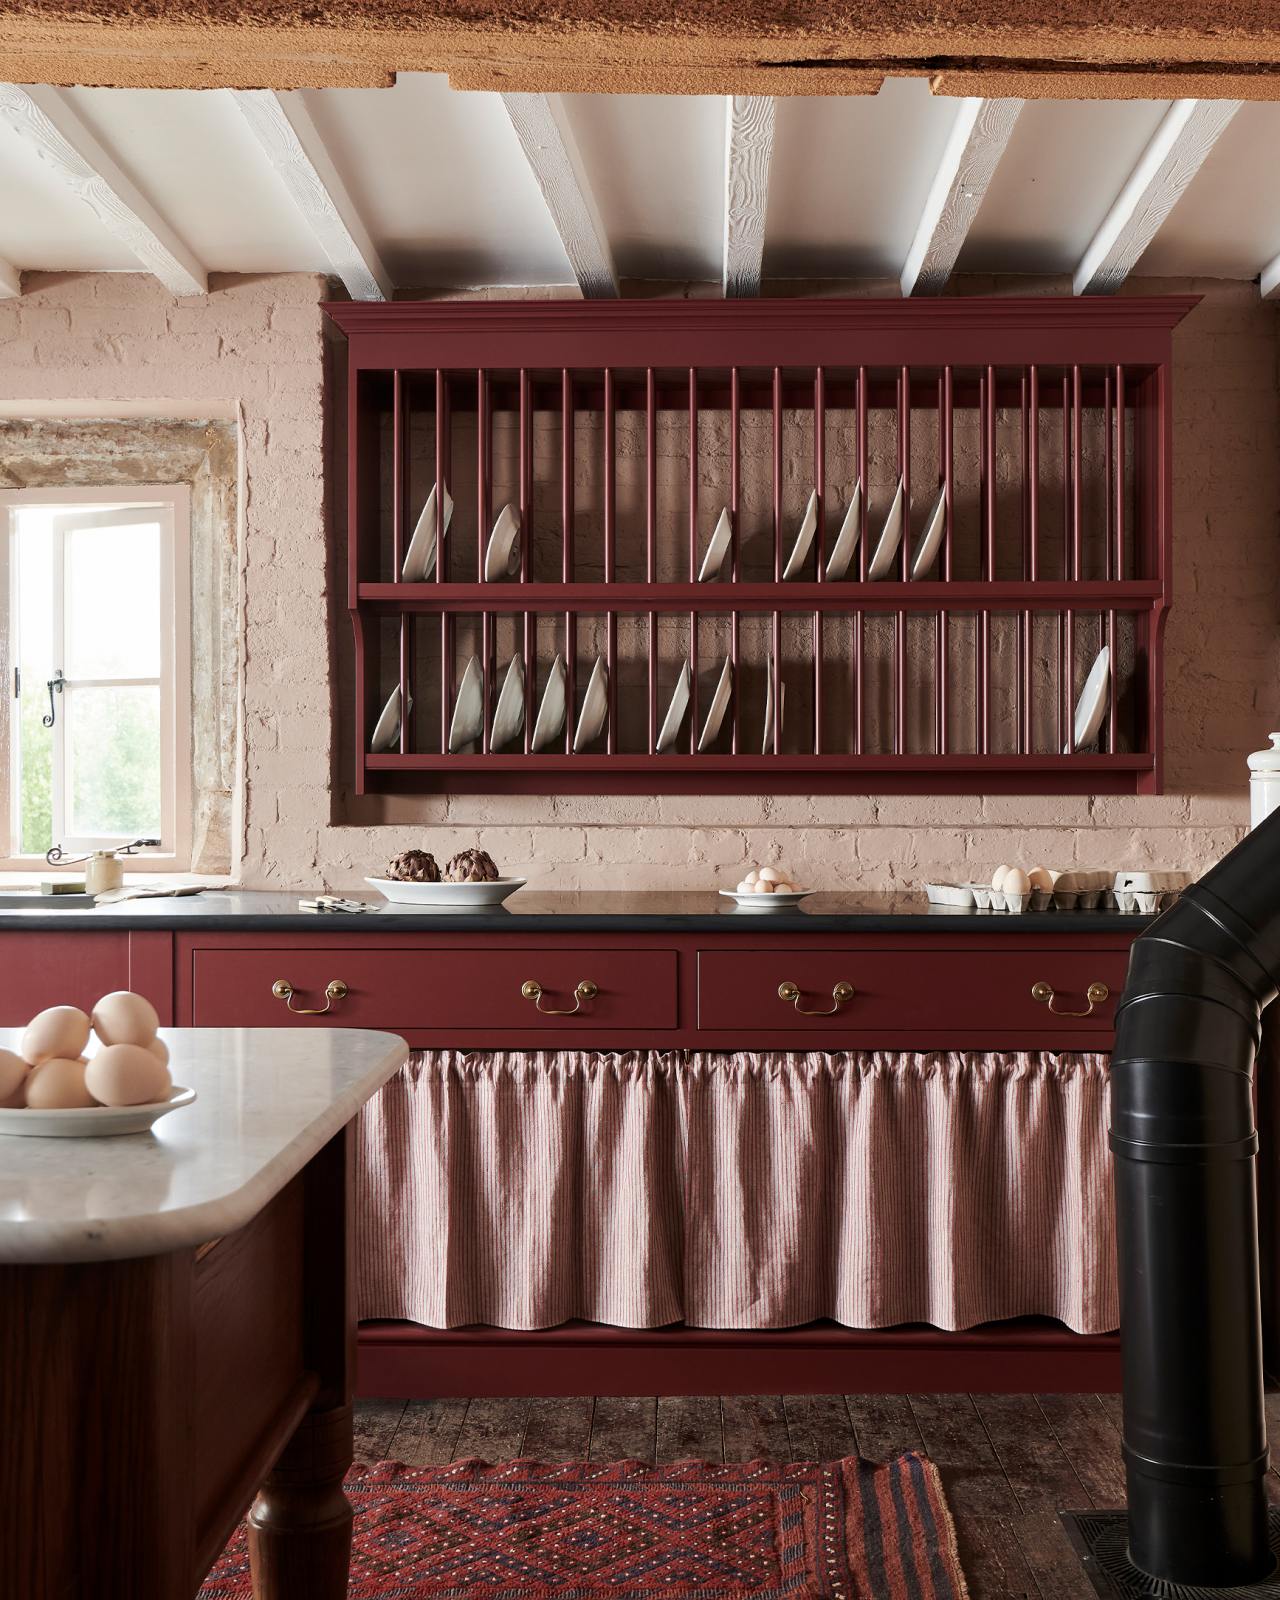 Red kitchens